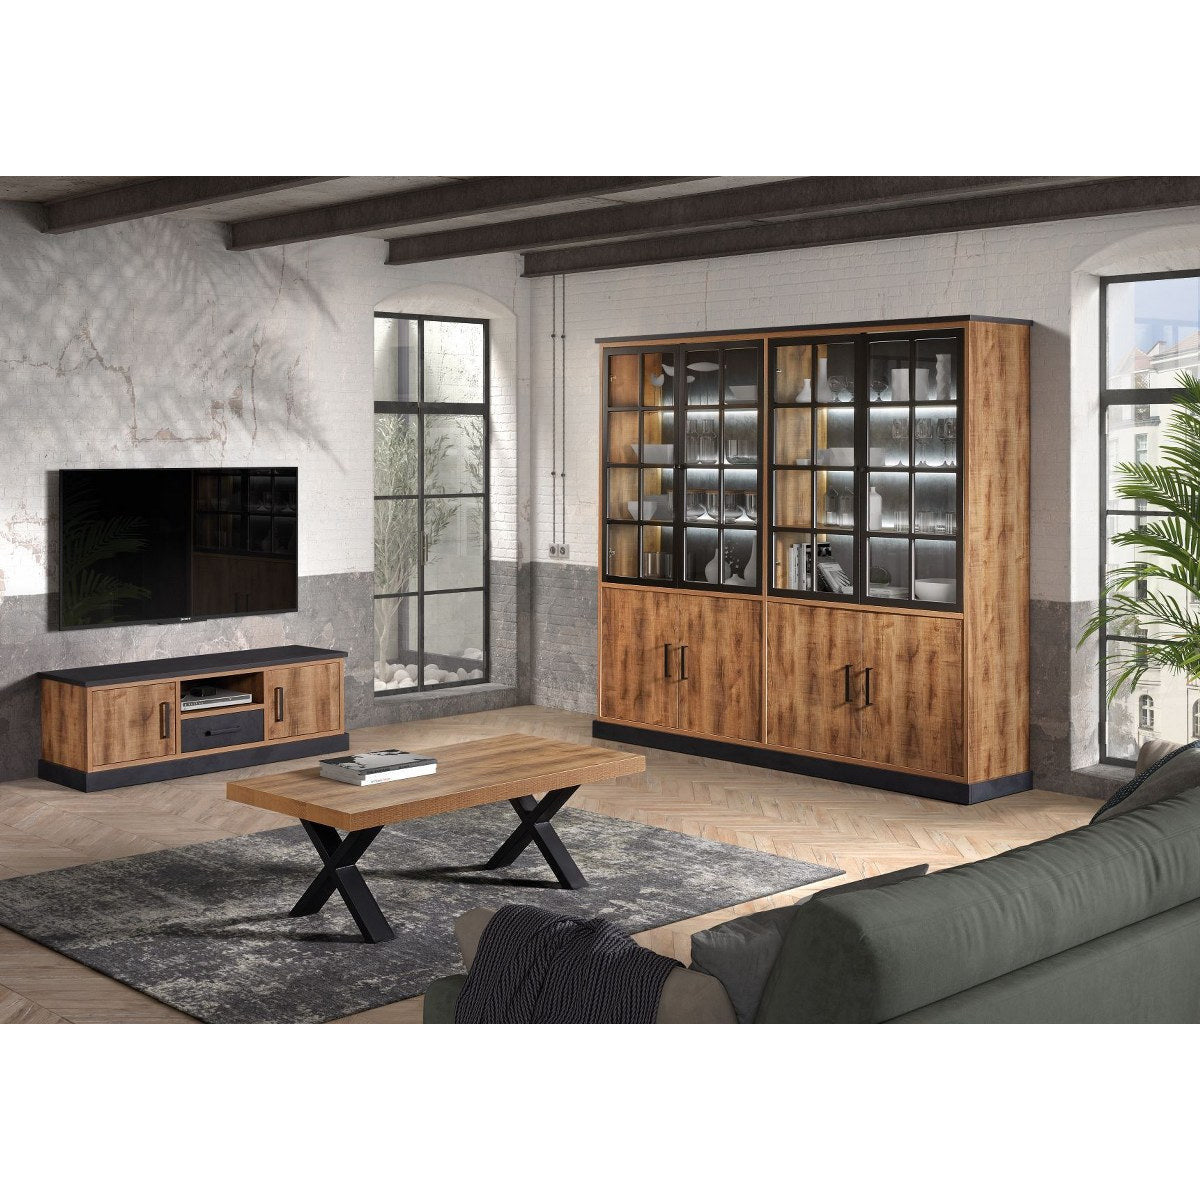 Display cabinet | Furniture series Cologne | brown | 120x45x211